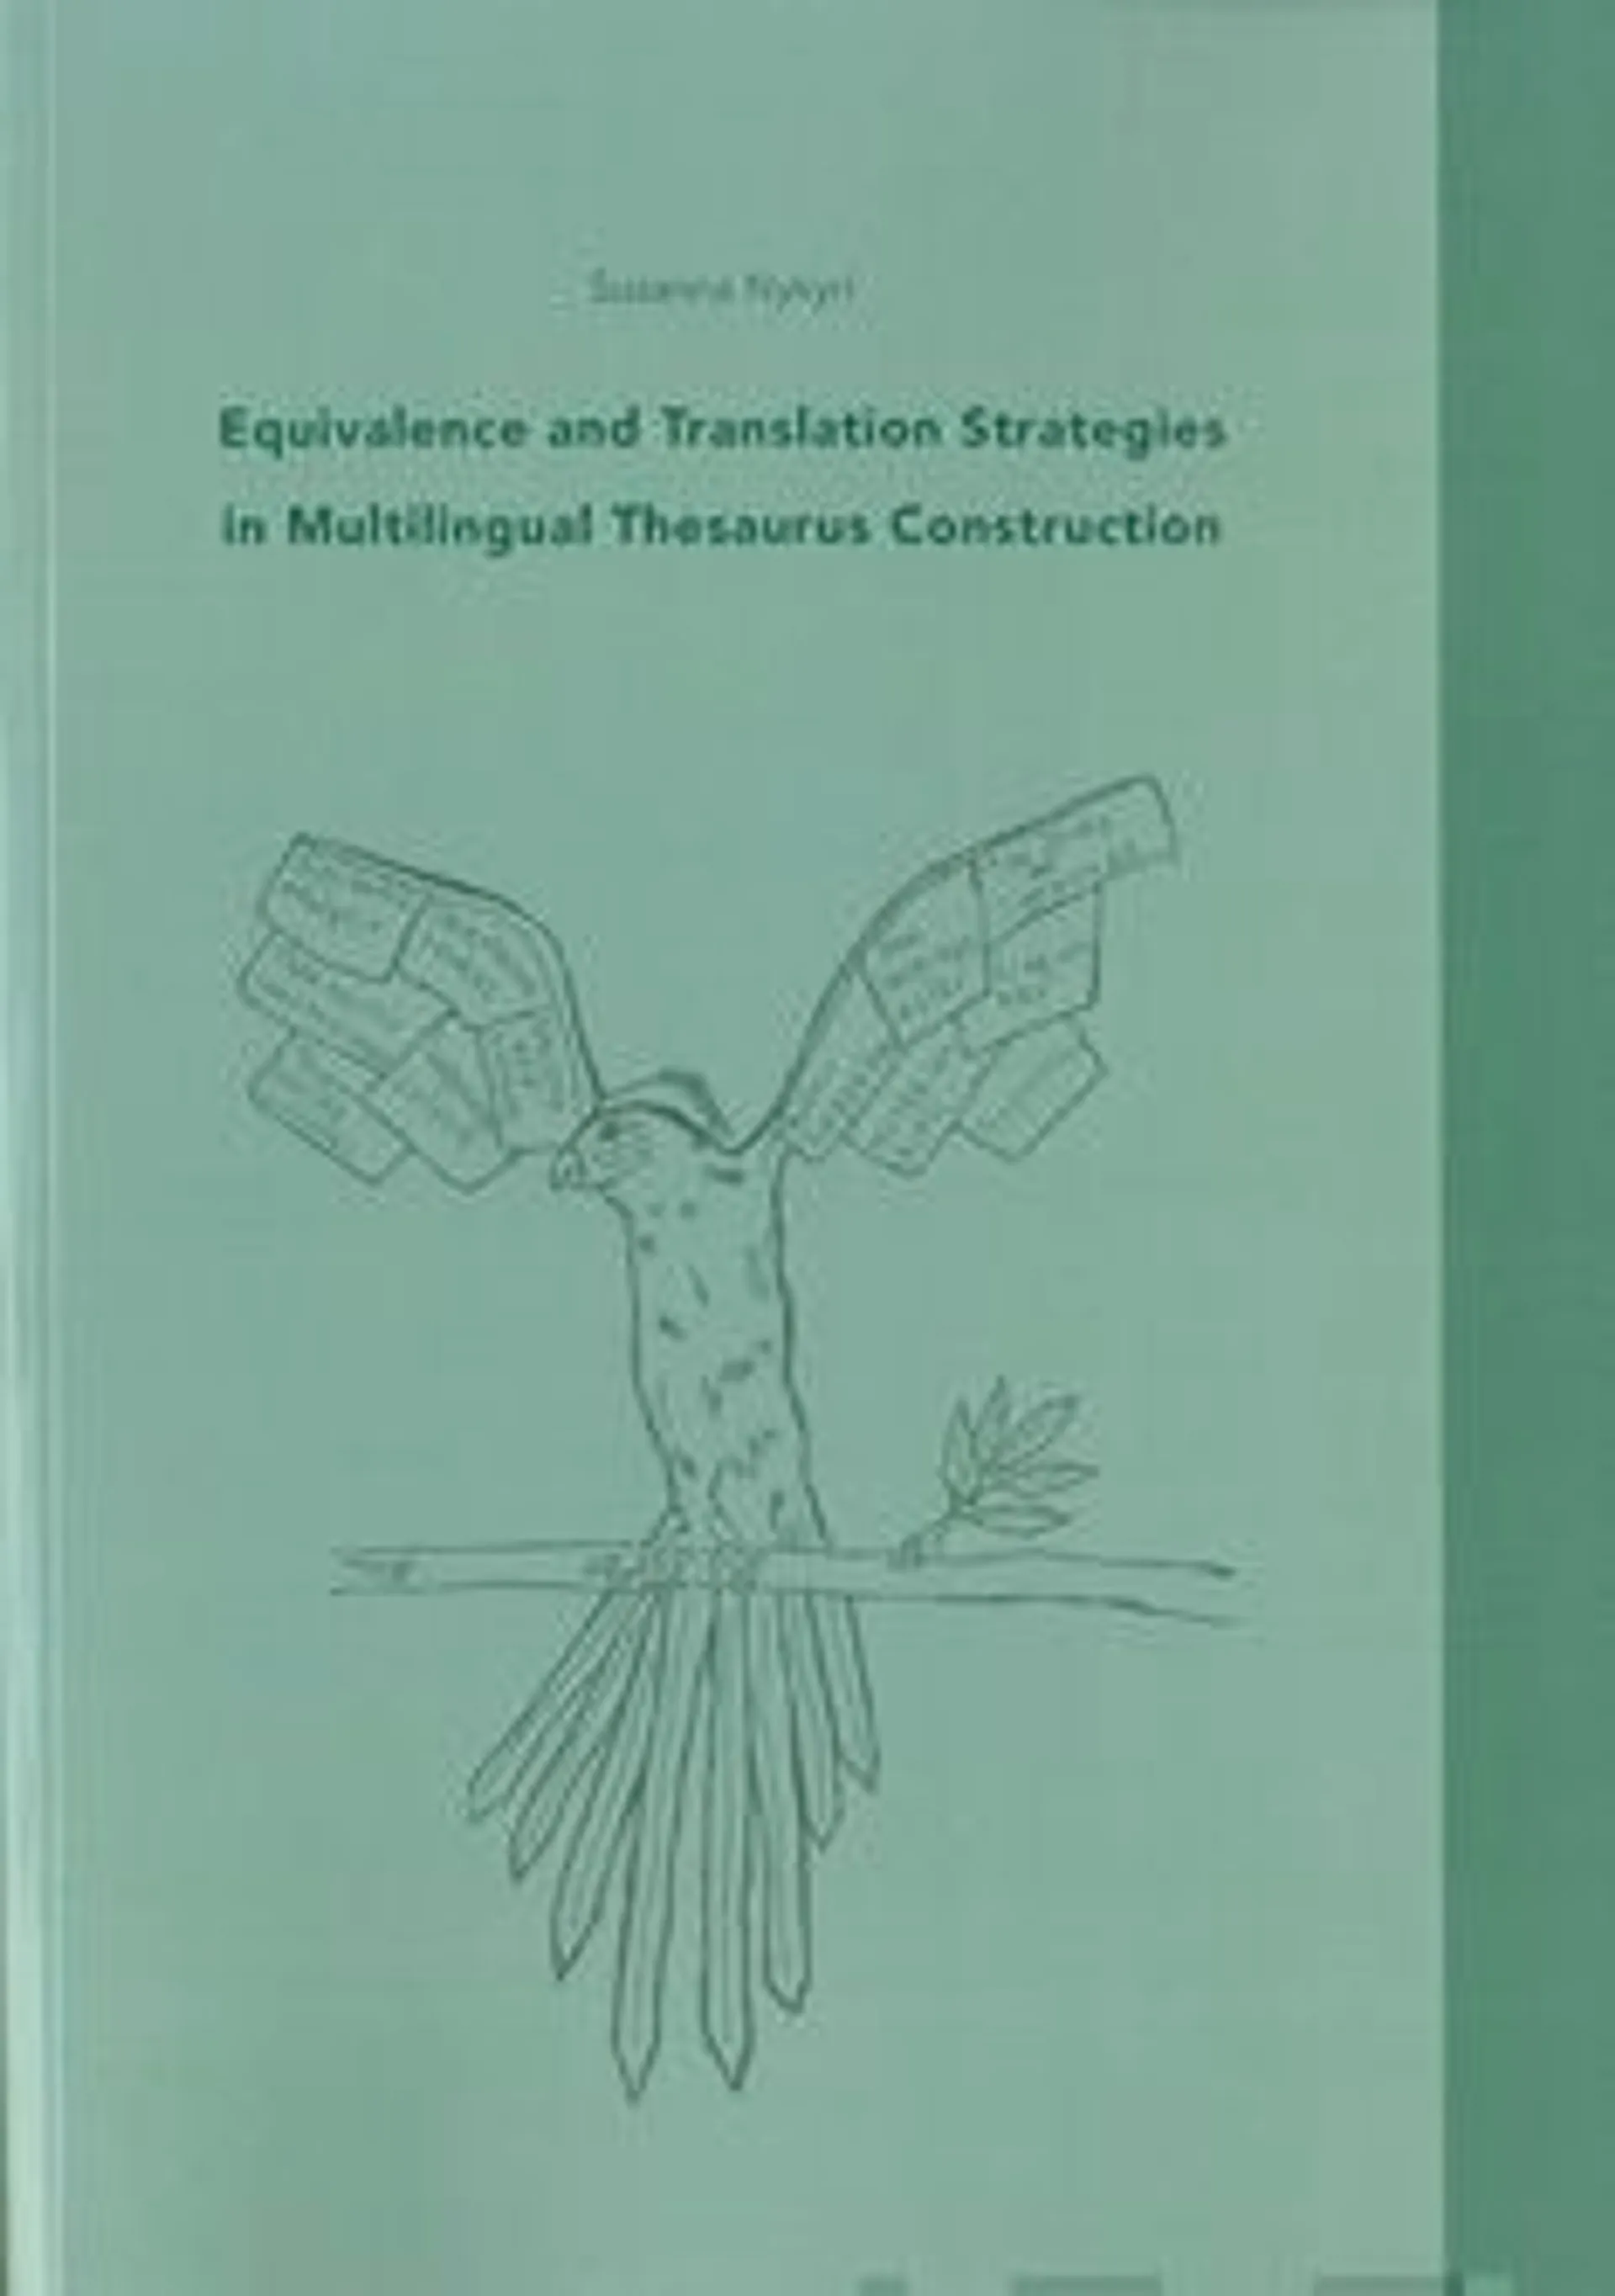 Nykyri, Equivalance and Translation Strategies In Multilingual Thesaurus Construction